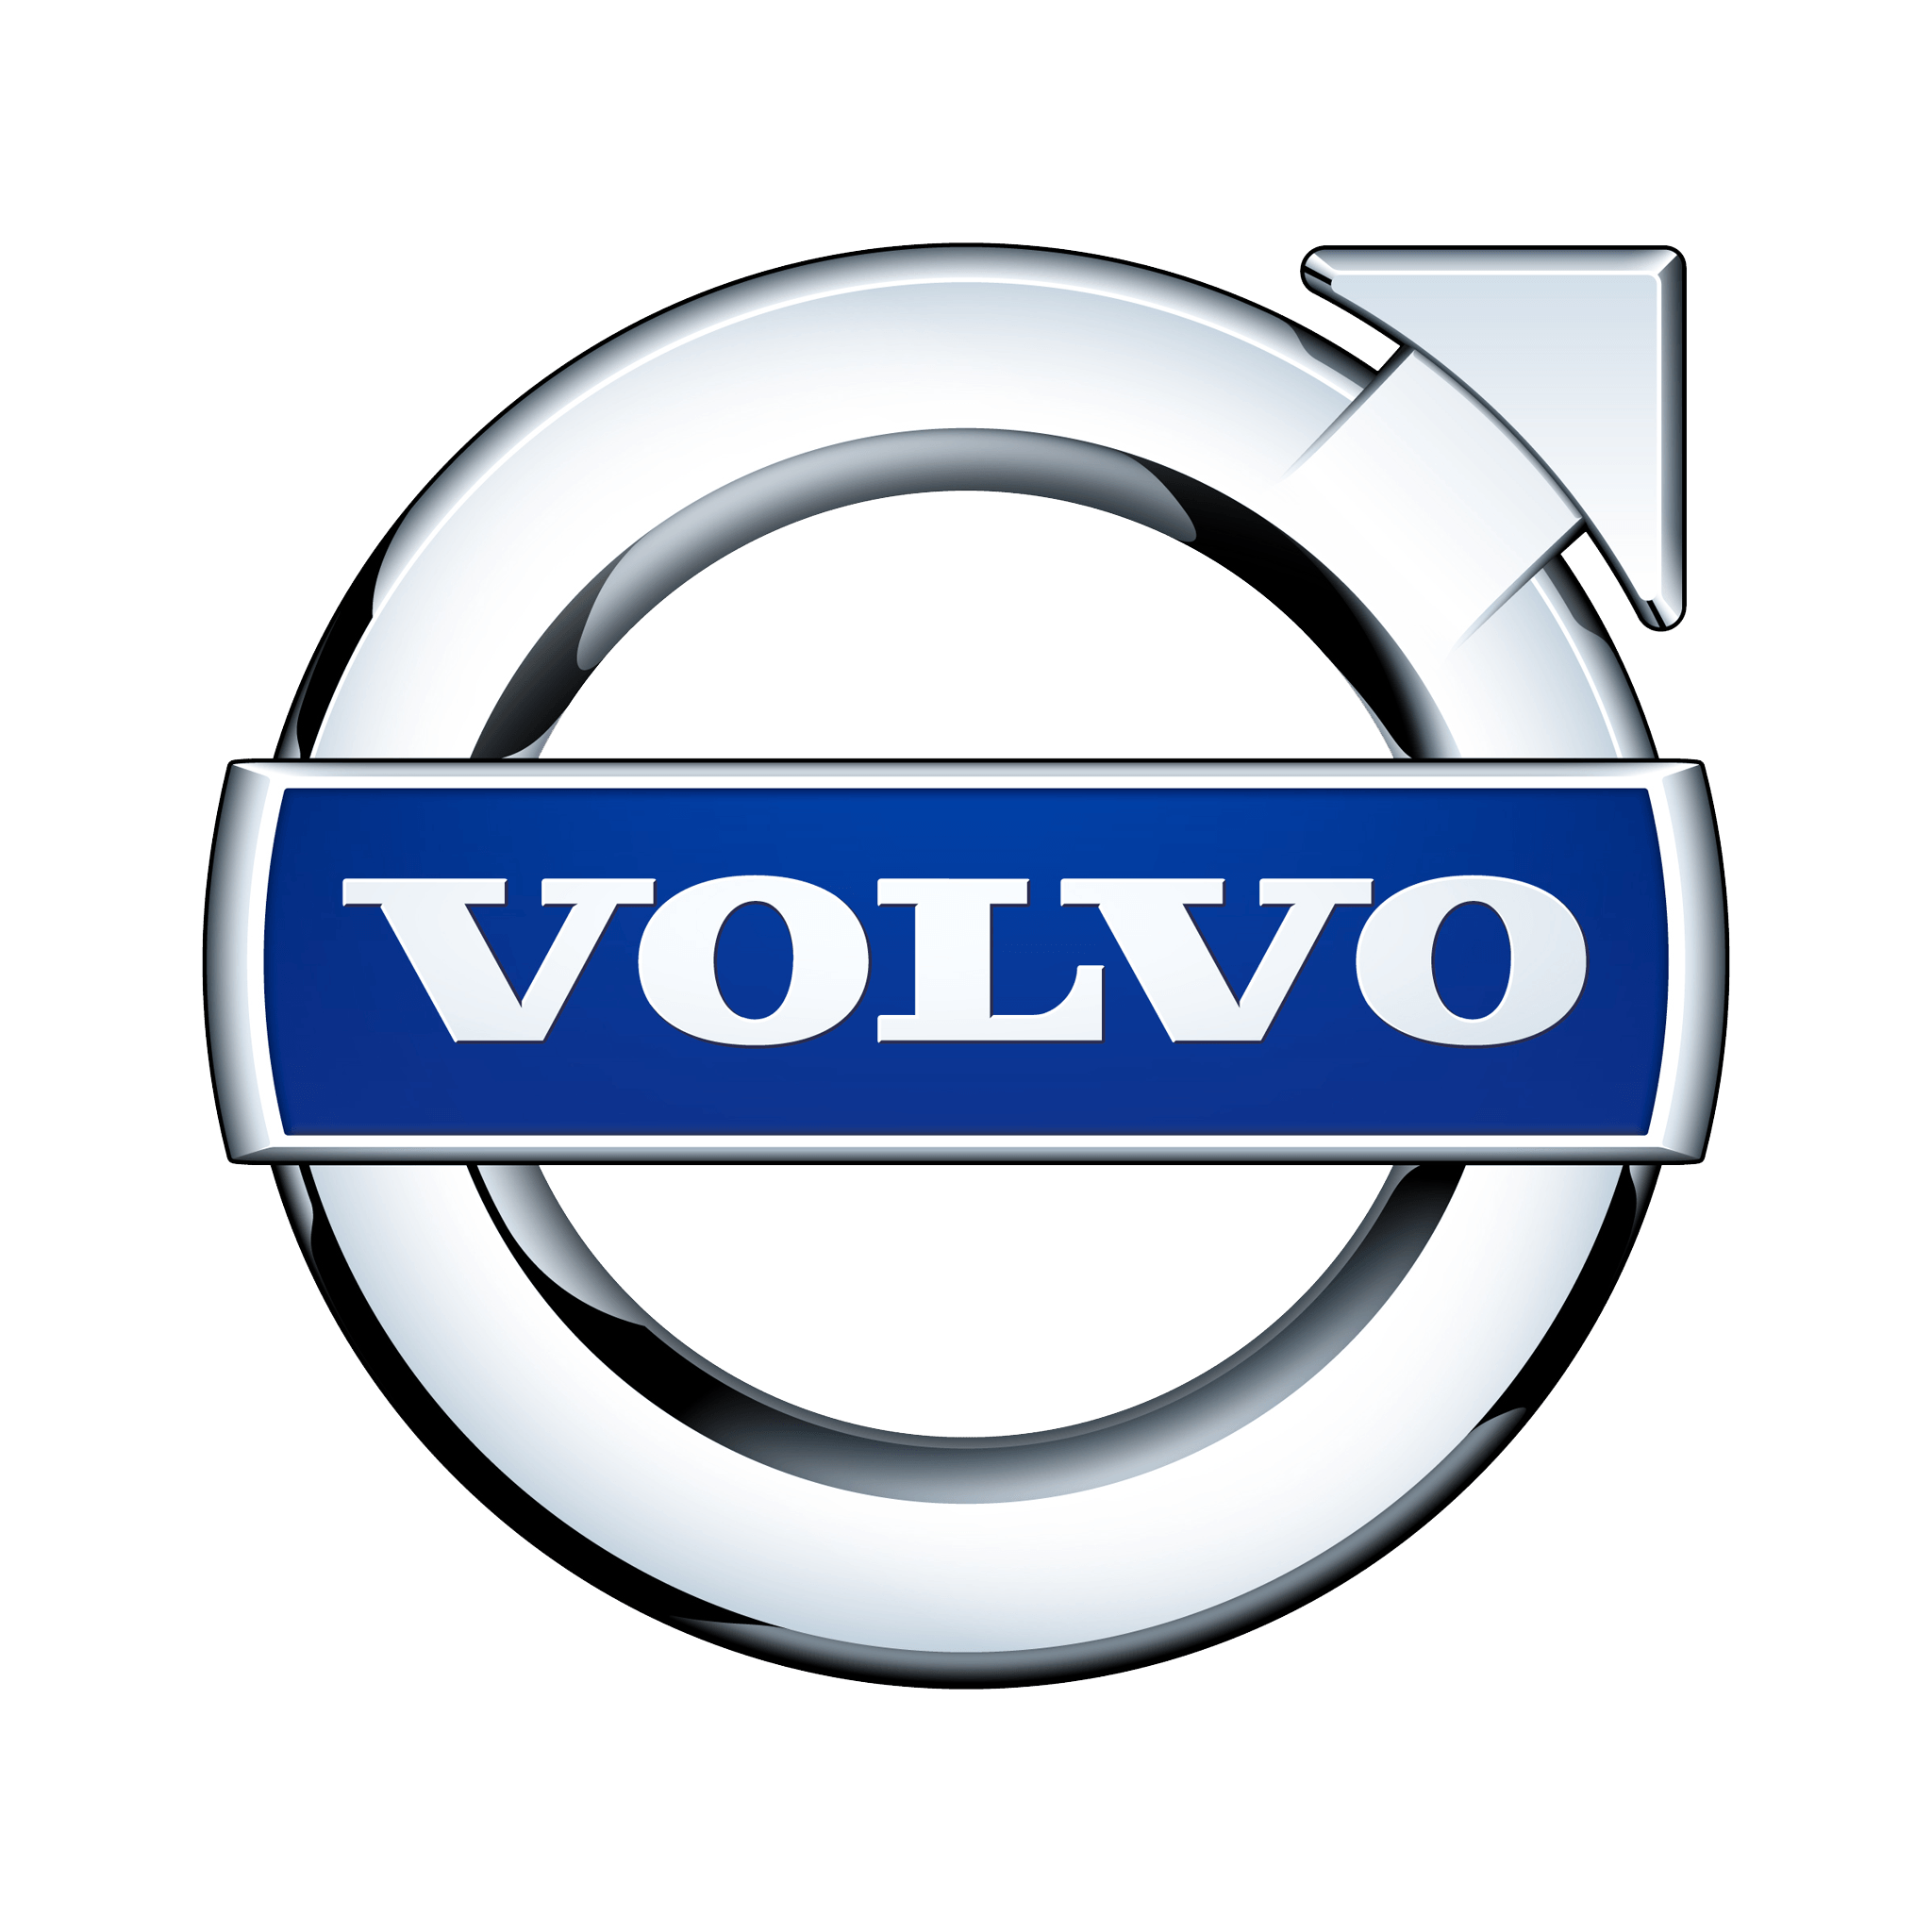 Famous Car Brand Logo - 5 Logo of Famous Car Brands & Their Meanings – Sureplify blog